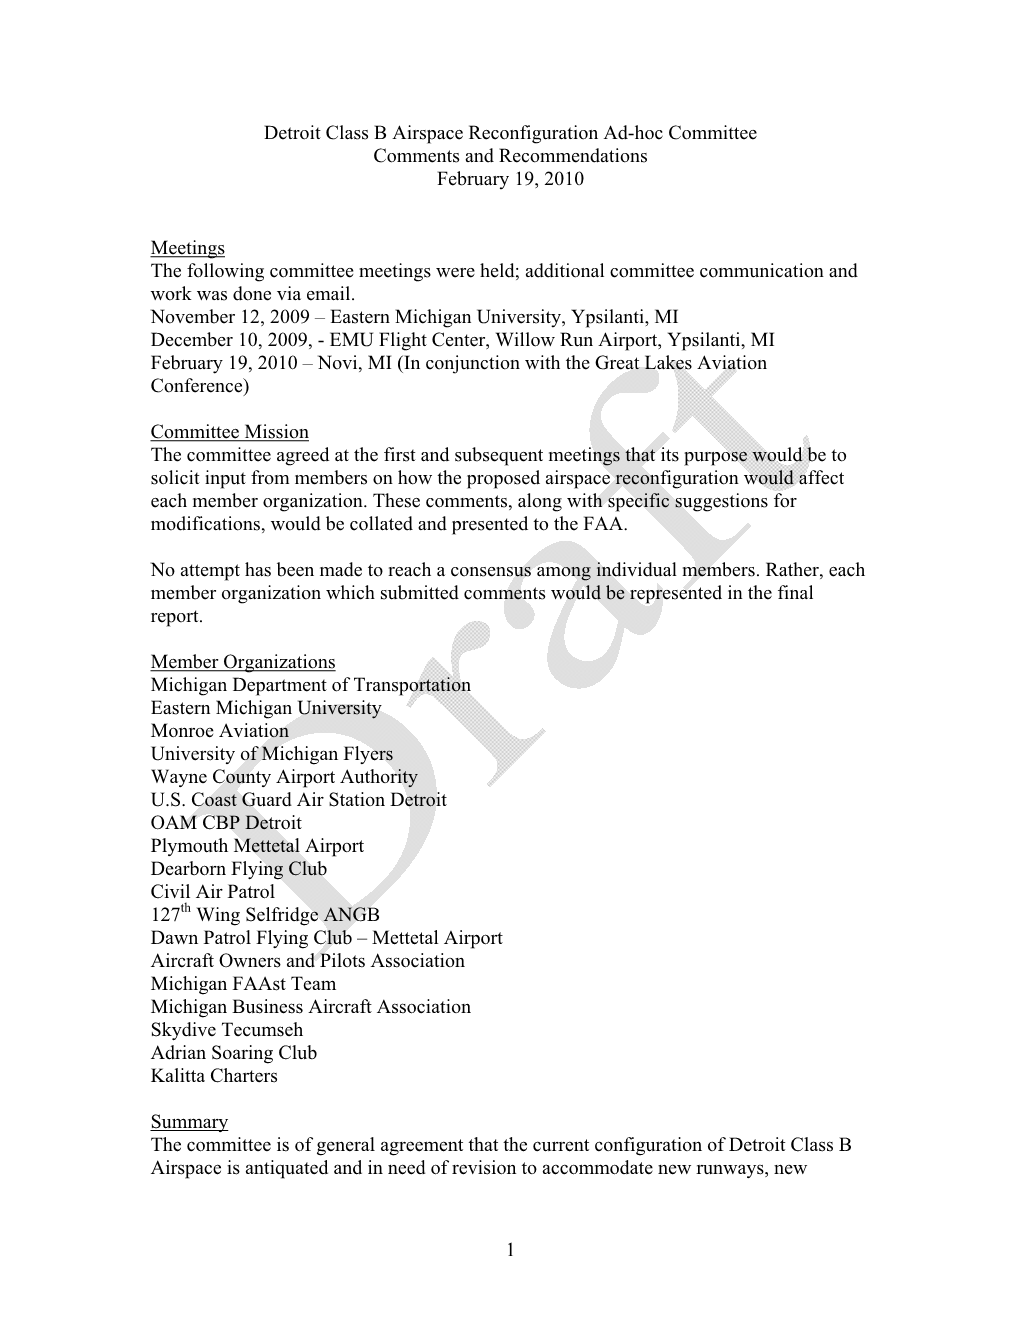 Detroit Class B Airspace Reconfiguration Ad-Hoc Committee Comments and Recommendations February 19, 2010